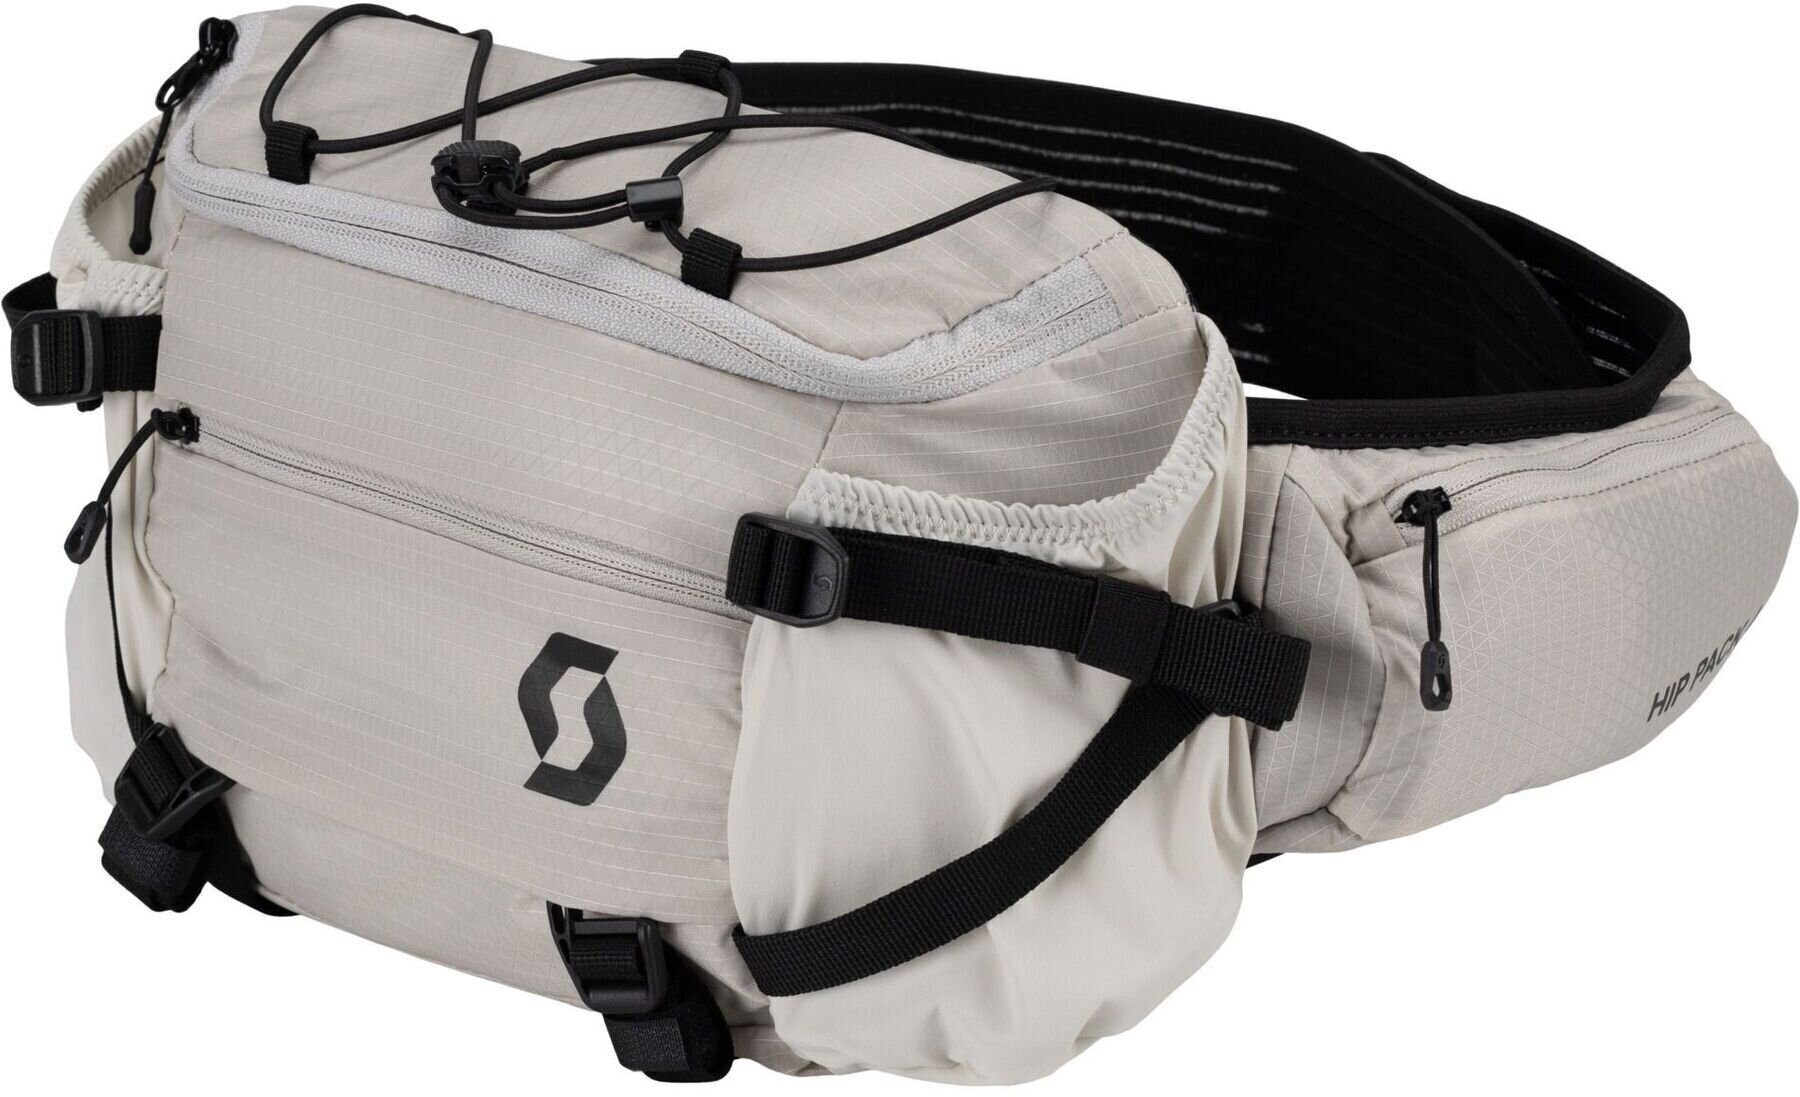 Cycling backpack and accessories Scott Trail 4 Hip Pack White Waistbag